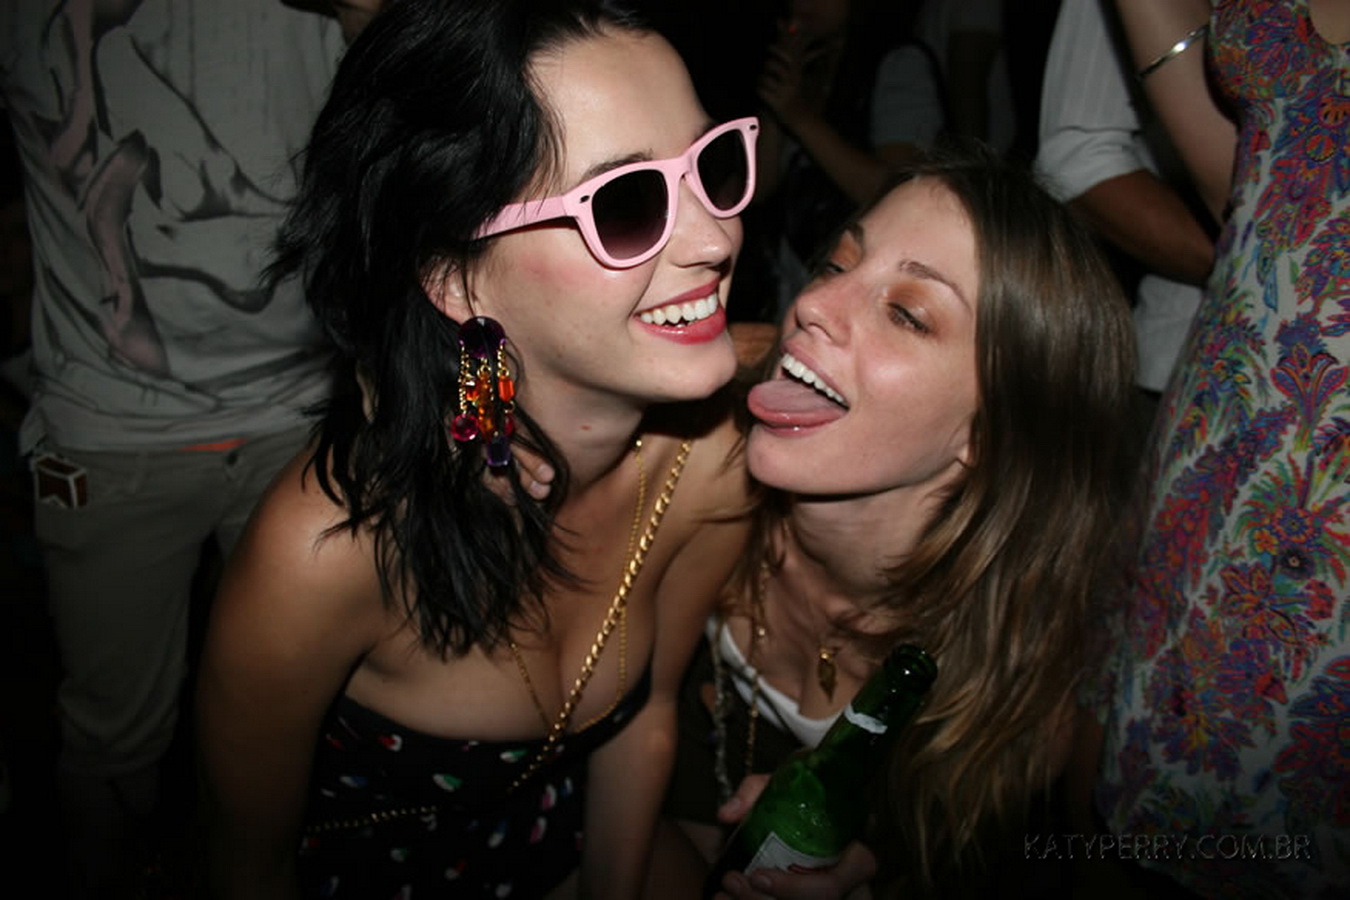 Katy_Perry_bobsslip_drunk_cleavage_downblouse_upskirt_nipslip_at_her_birthday_2007_party_99x_HQ_33.jpg